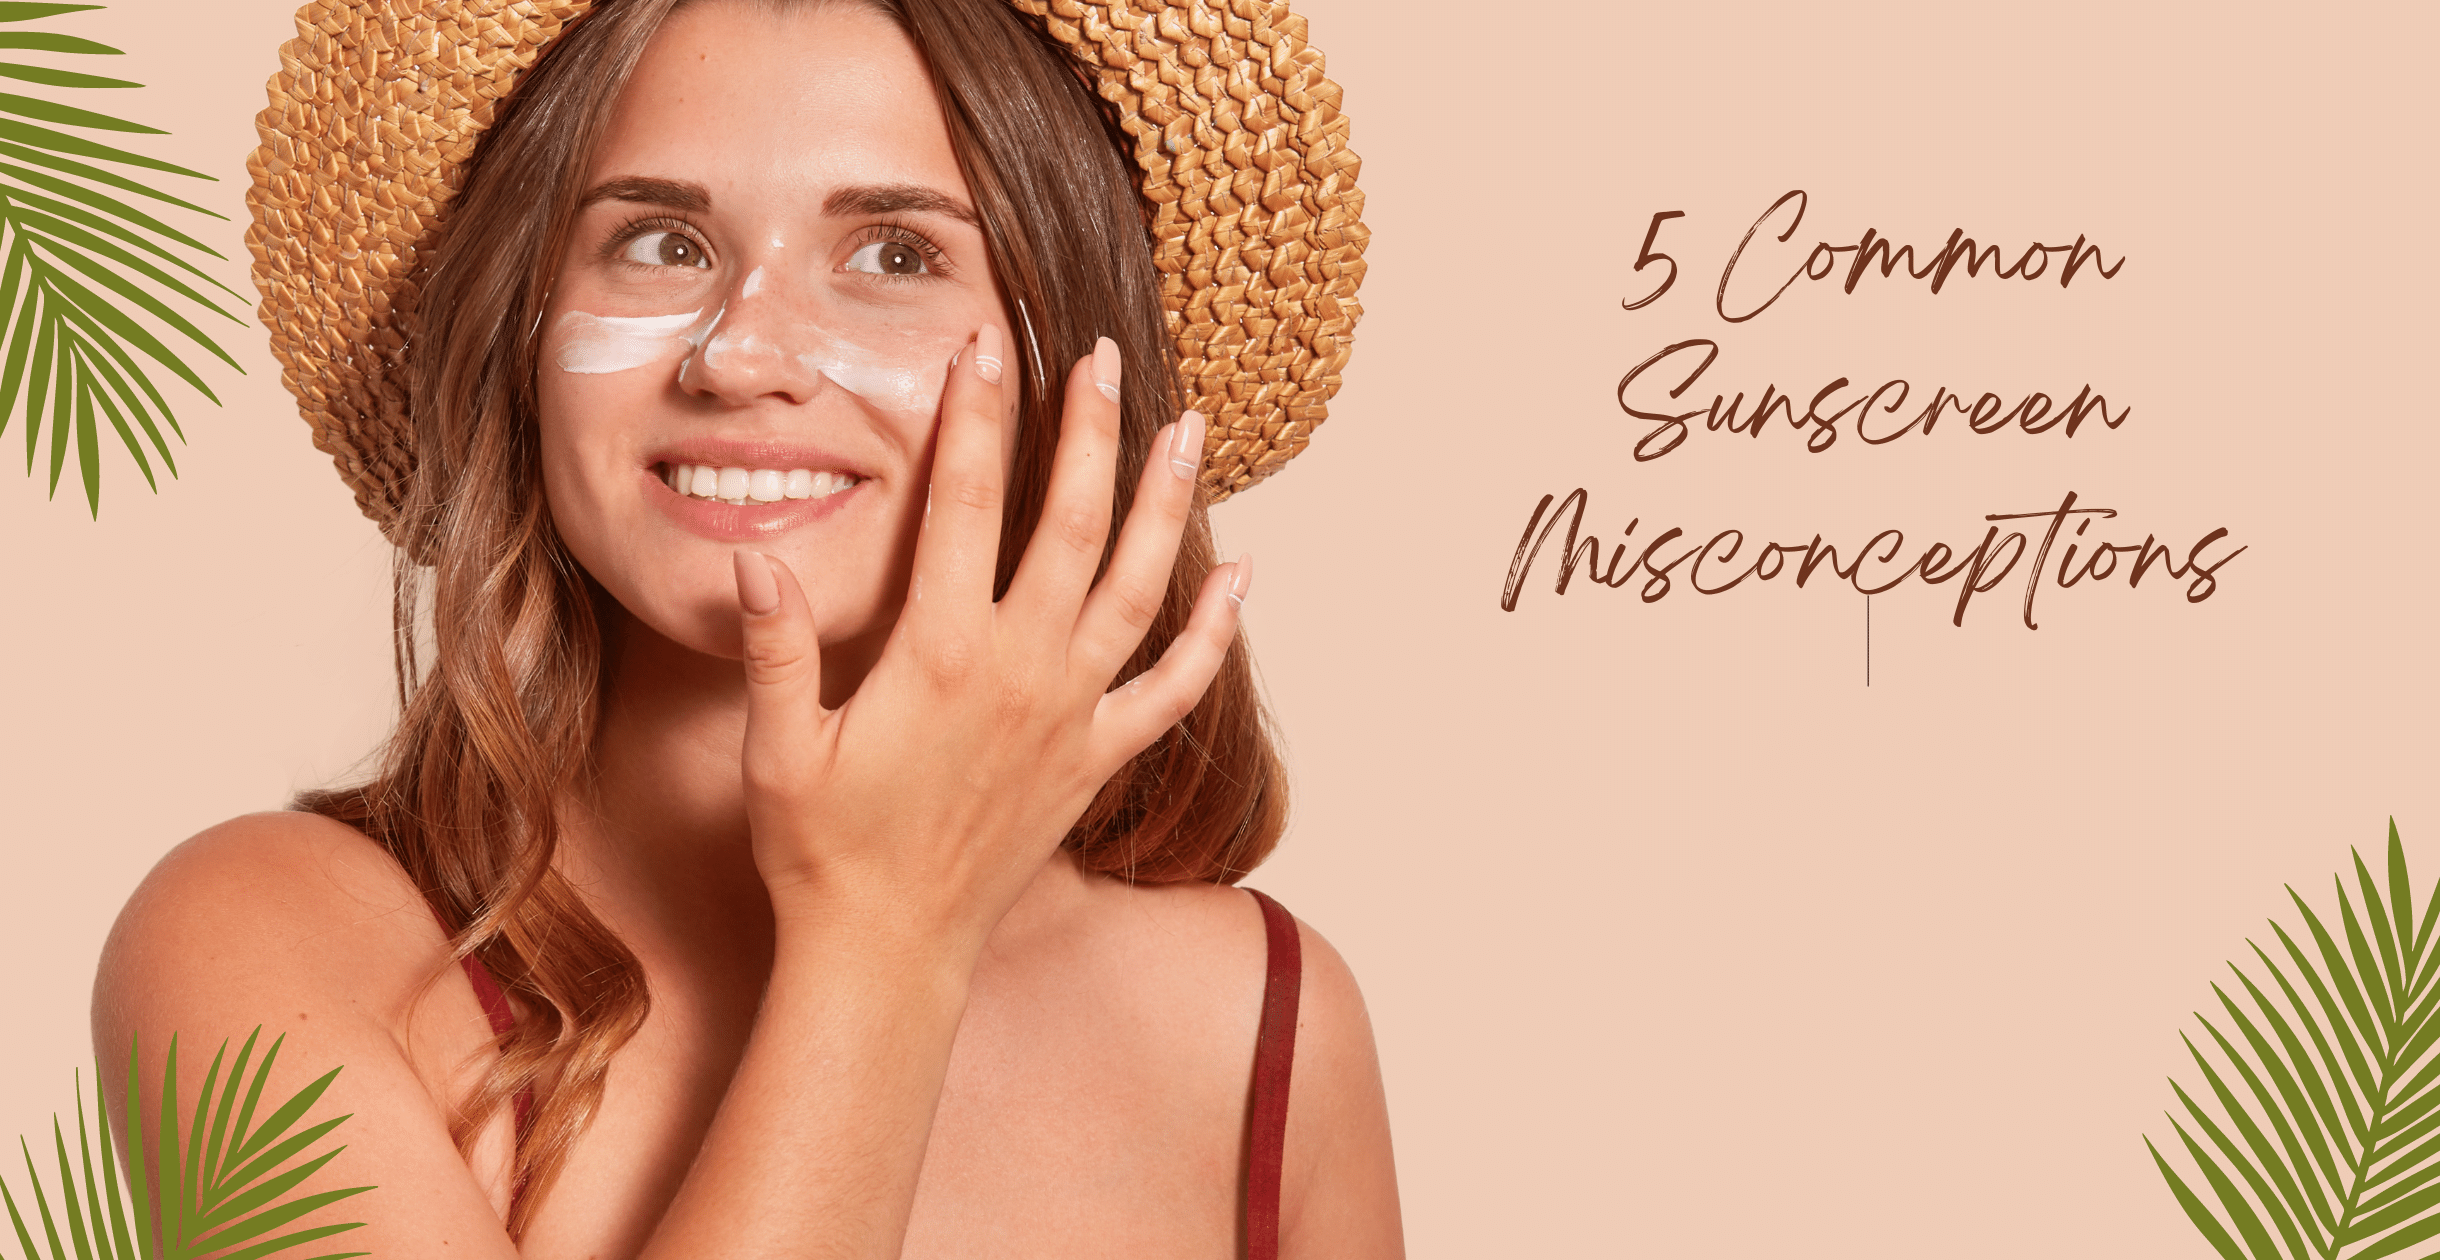 5 Common Sunscreen Misconceptions